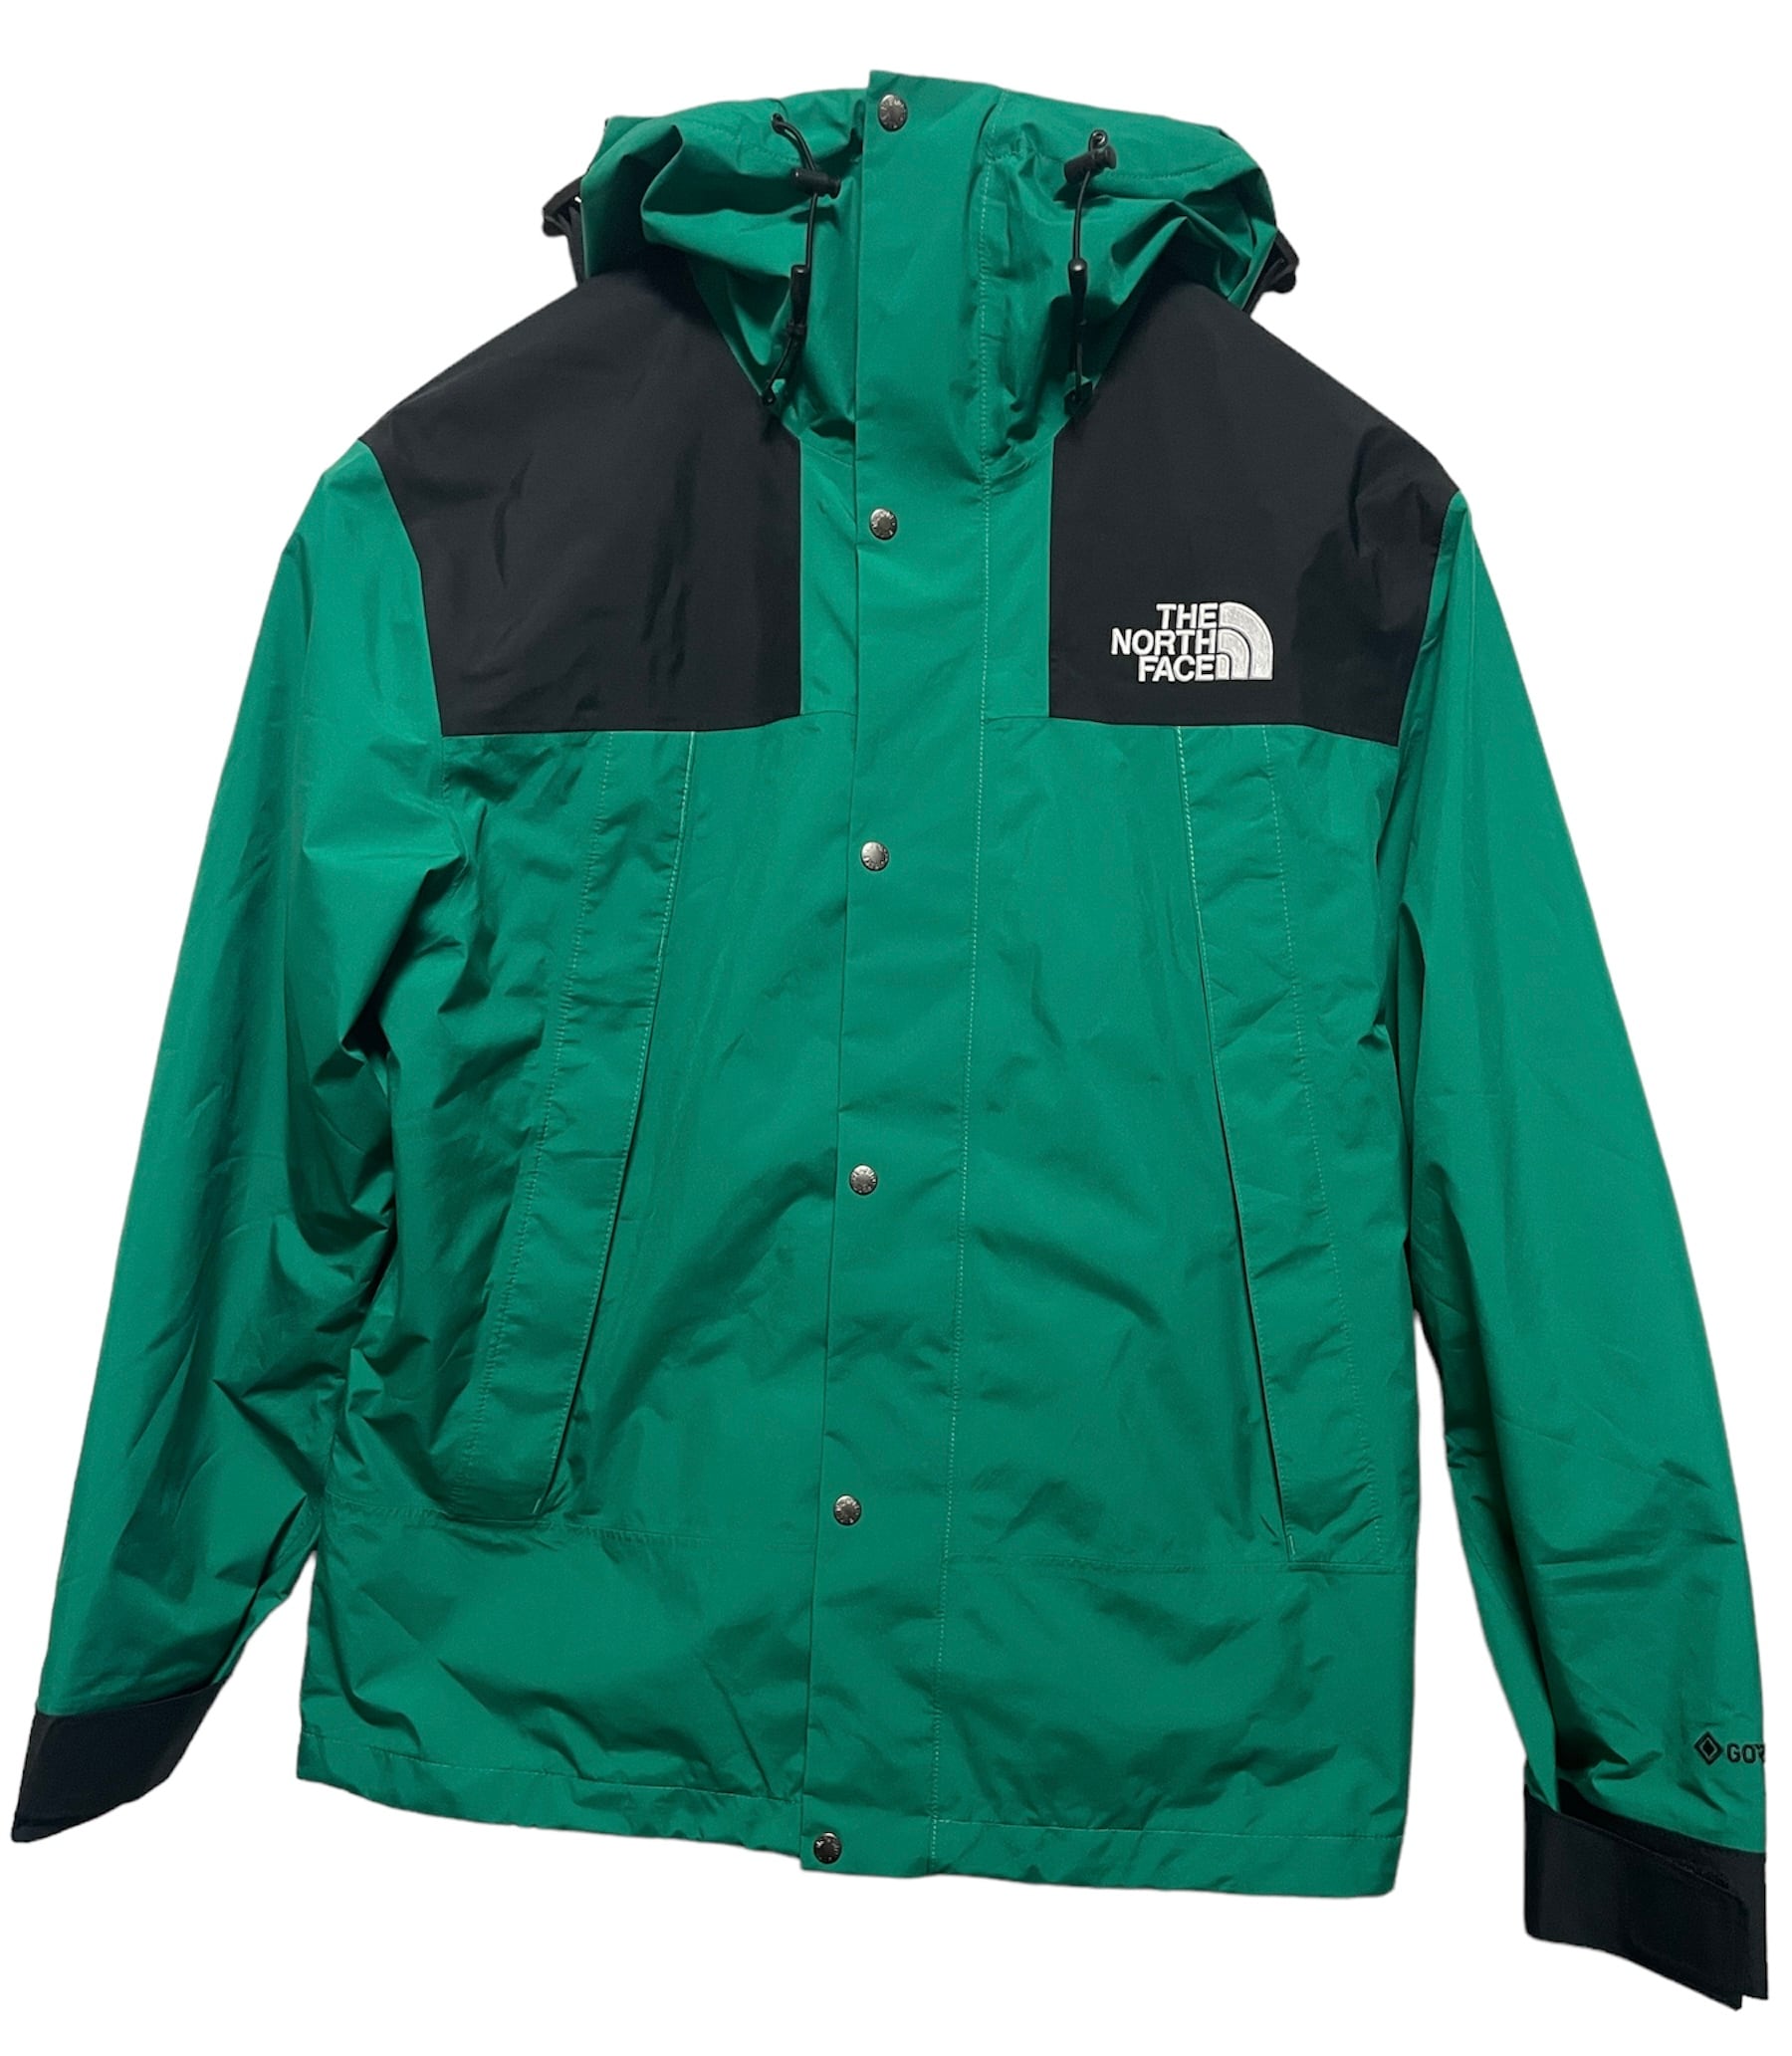 THE NORTH FACE - 1990 gore-tex mountain jacket (SIZE:L 